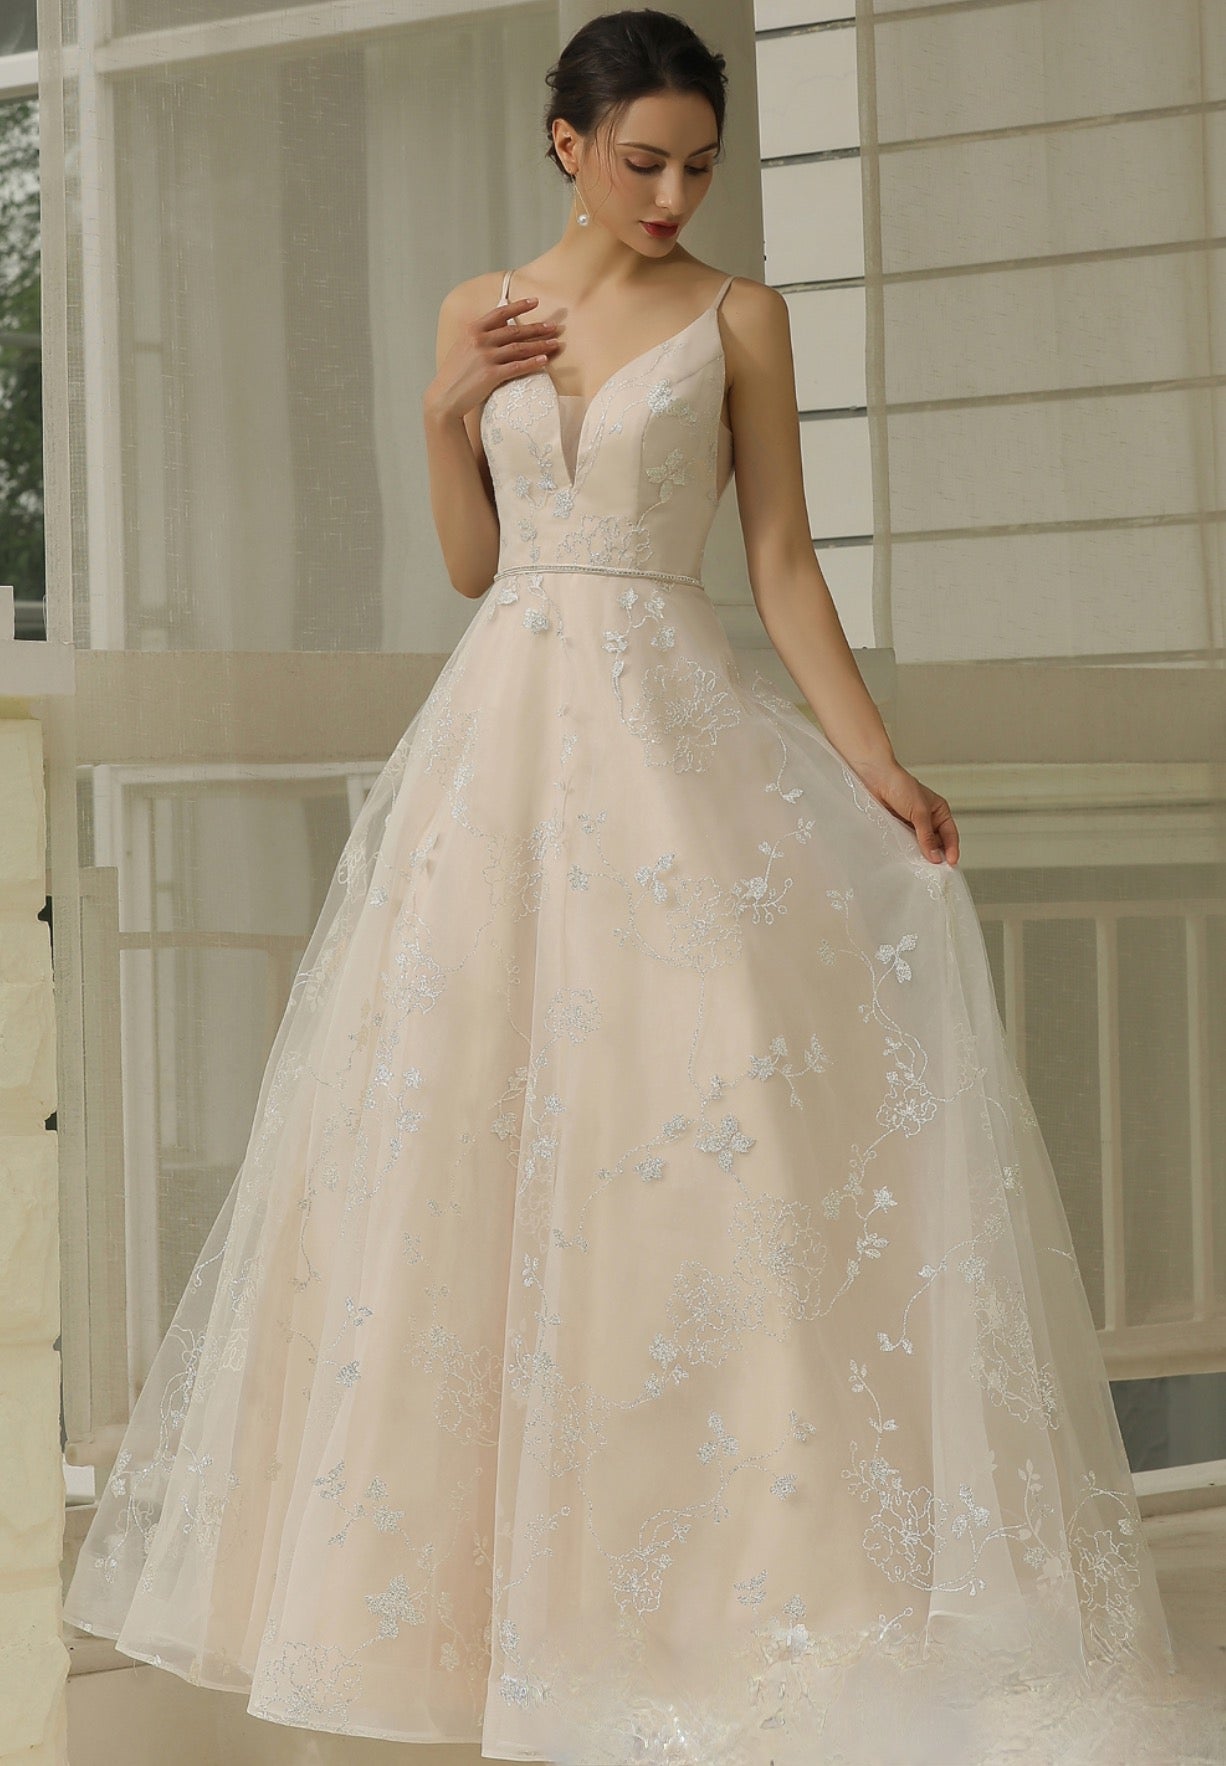 Glitter Patterned Wedding A Line Dress Bridal Gown